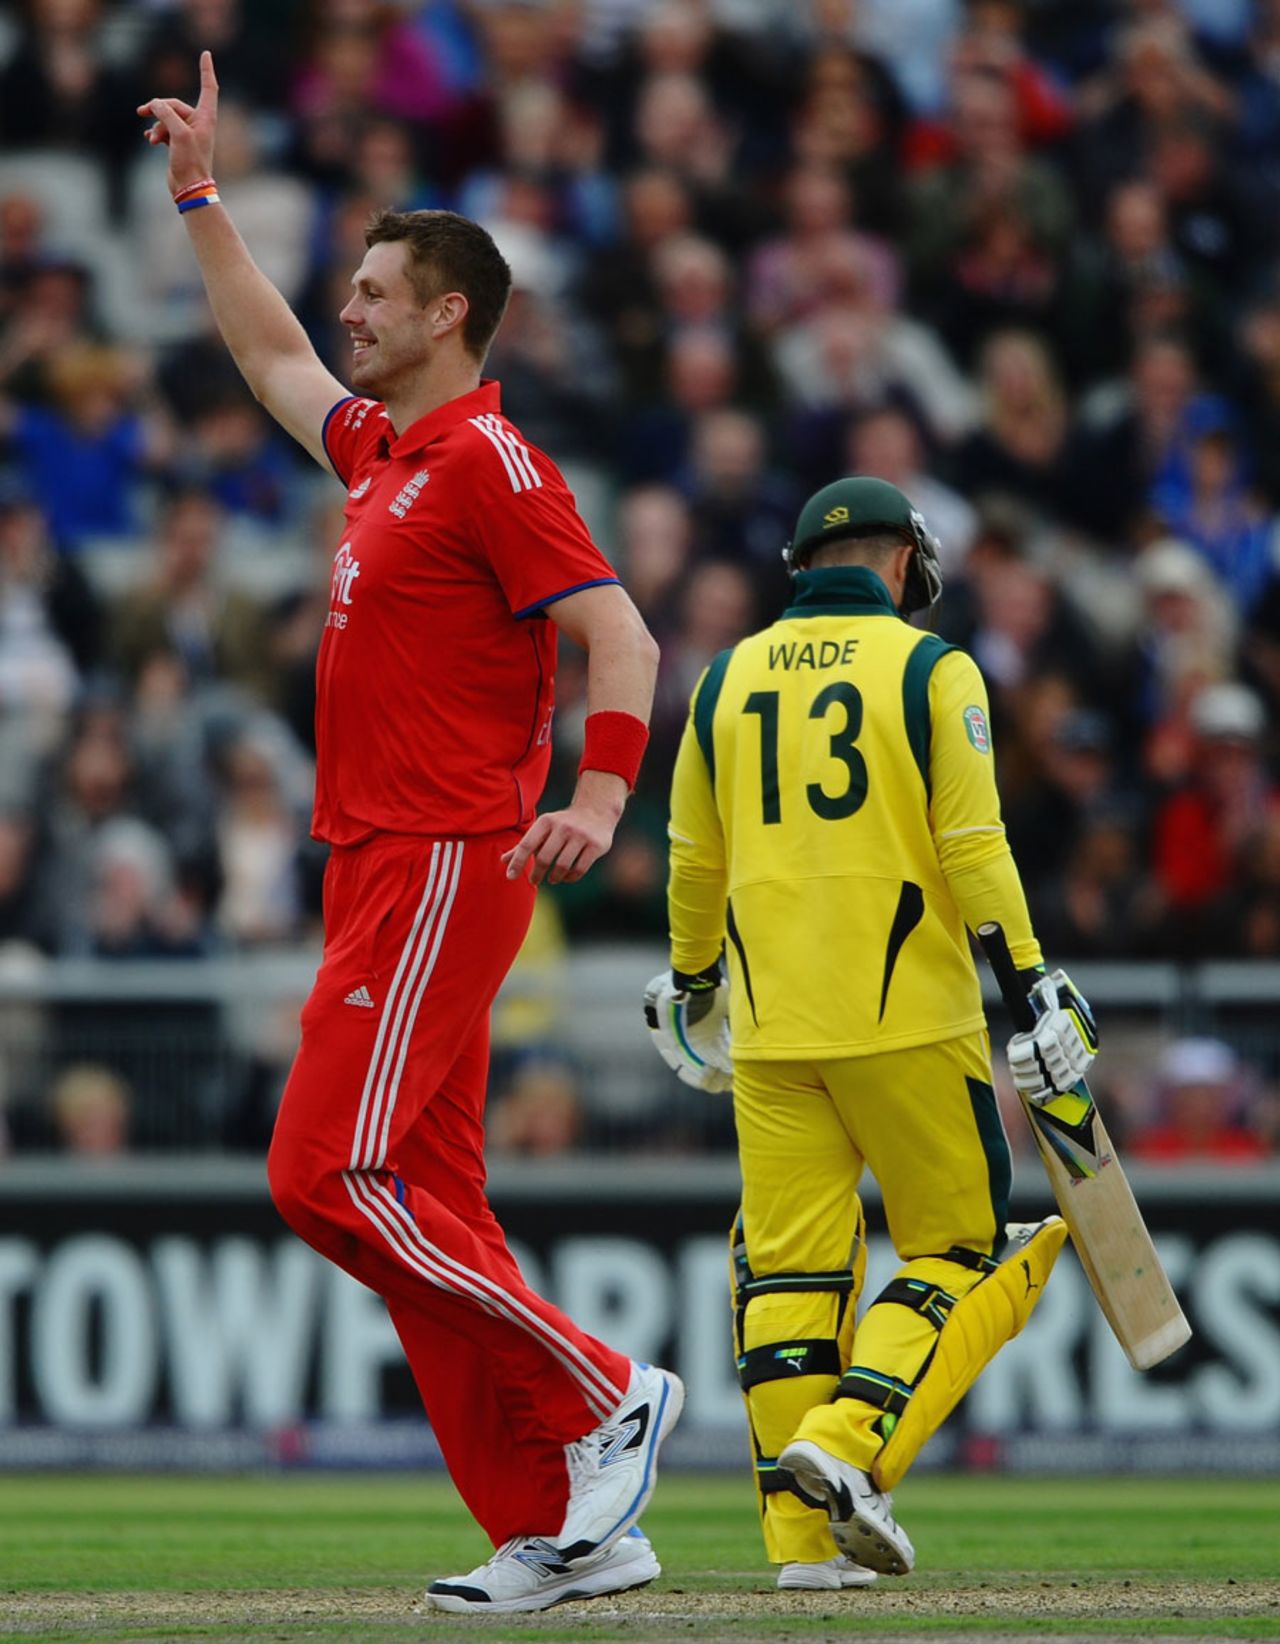 Boyd Rankin picked up two wickets in two balls, England v Australia, 2nd NatWest ODI, Old Trafford, September 8, 2013